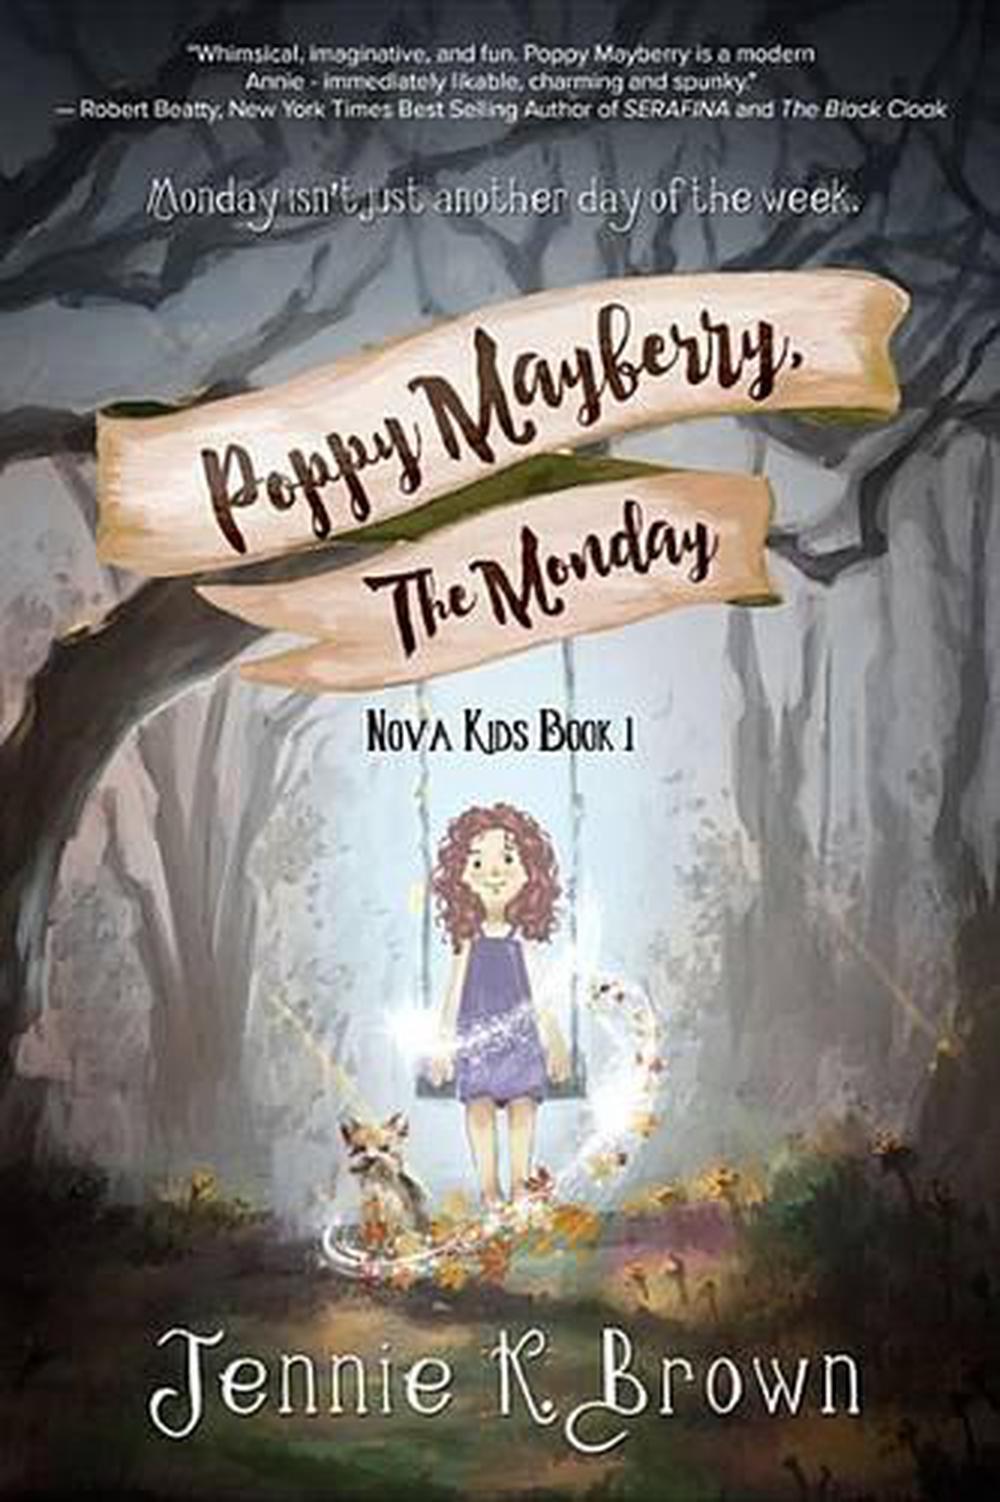 Poppy Mayberry, The Monday by Jennie K. Brown